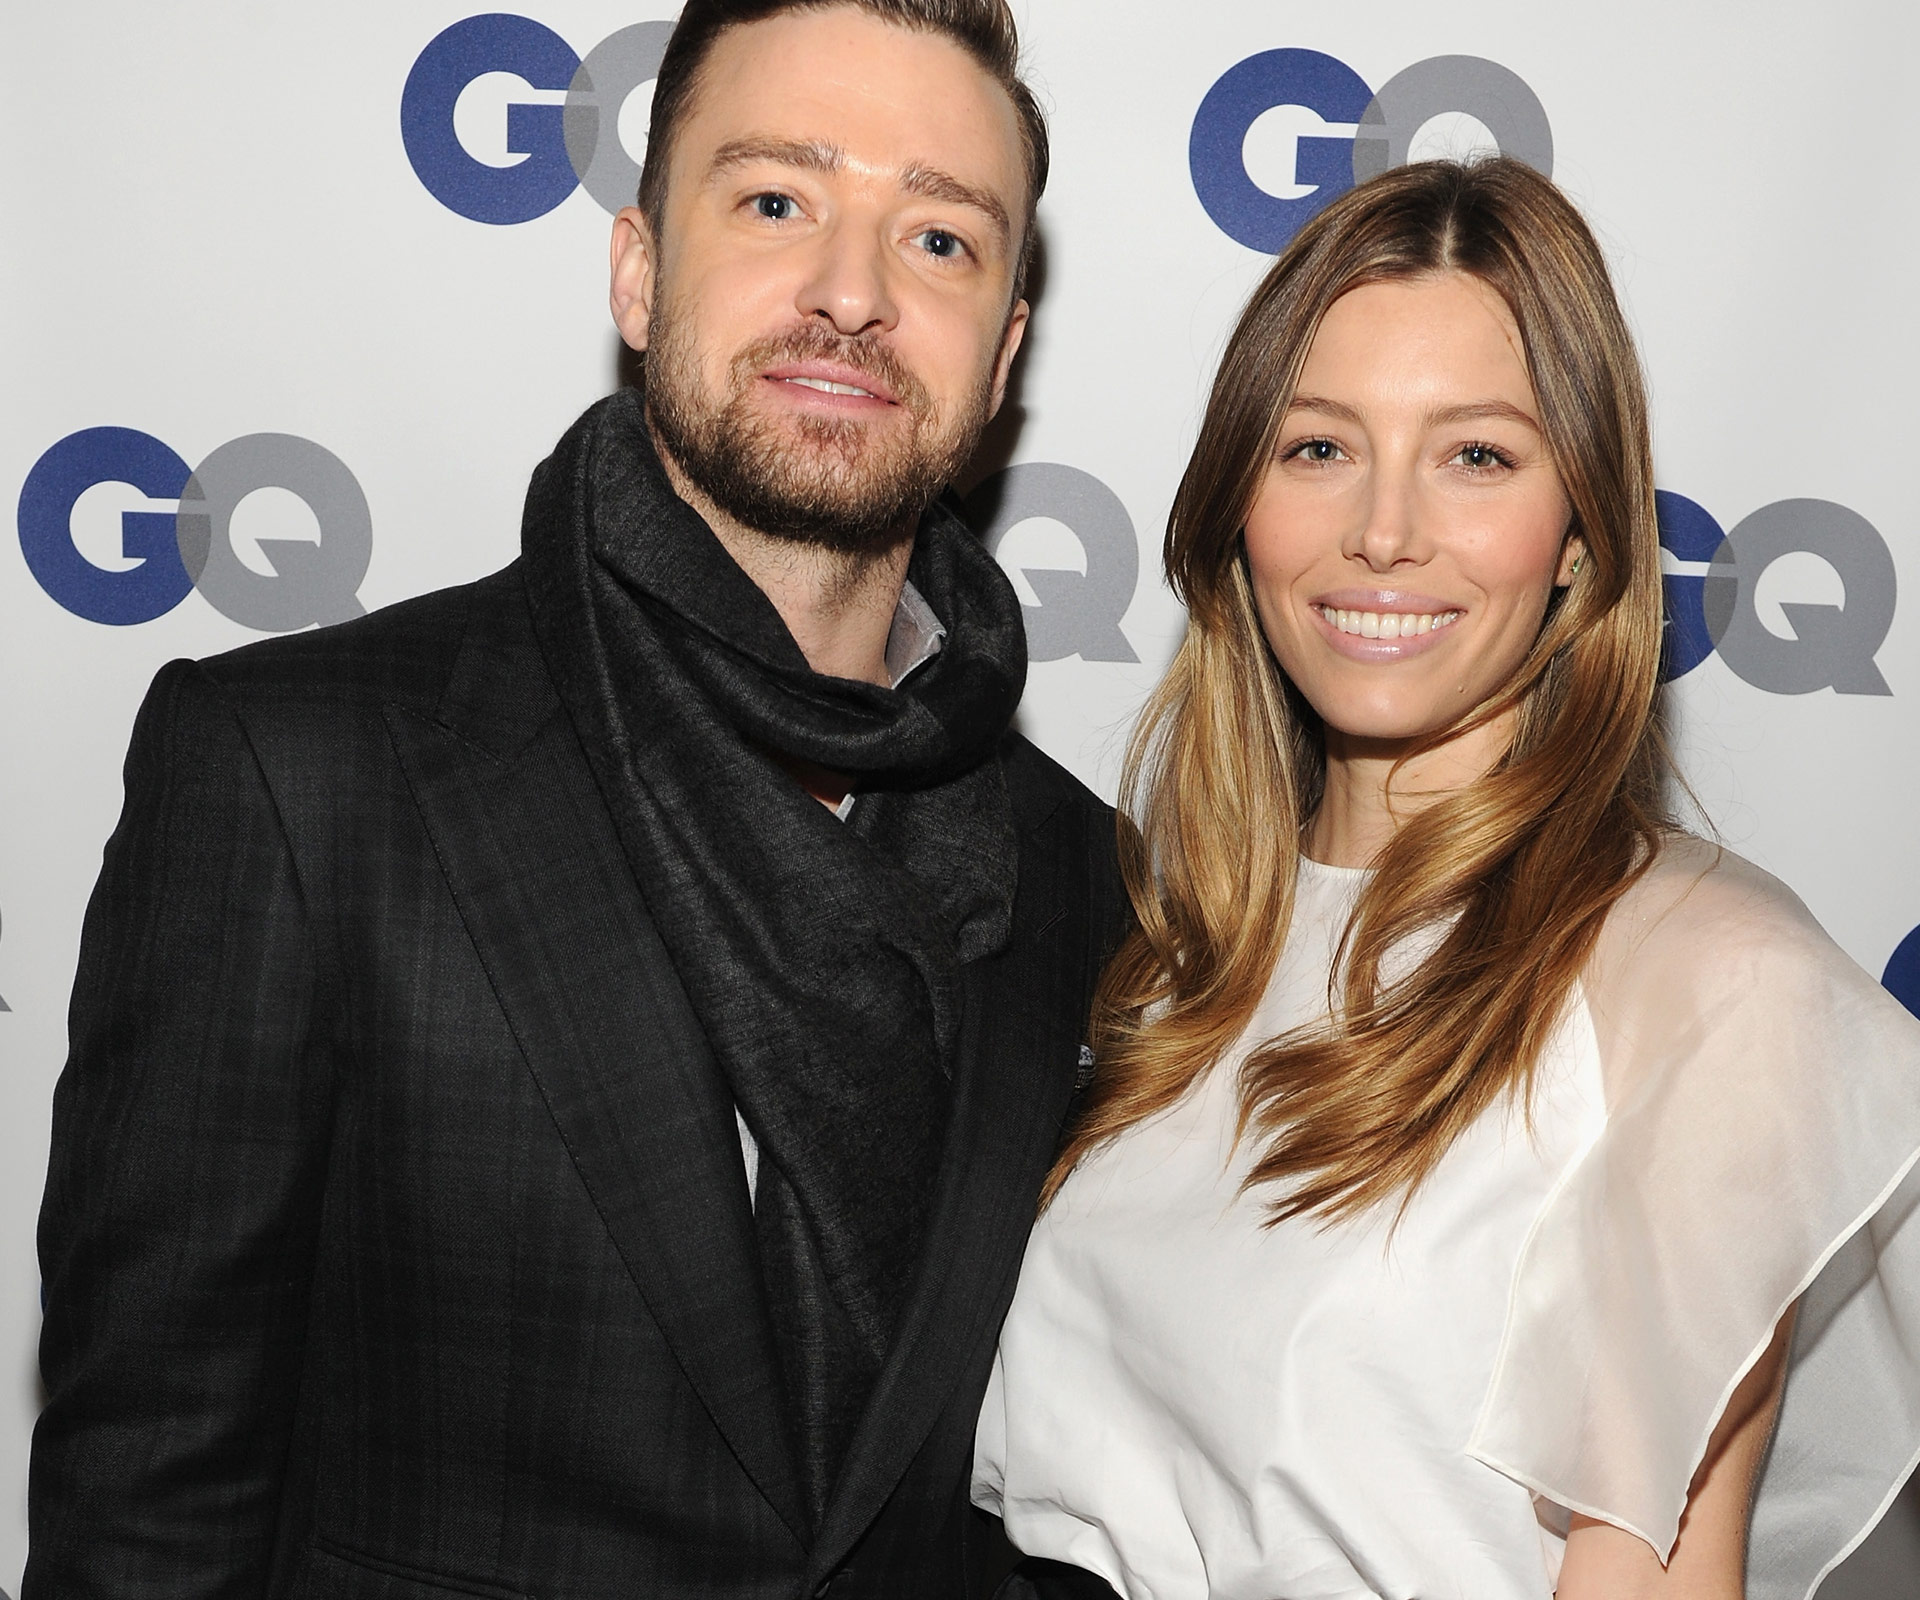 Justin Timberlake and Jessica Biel welcome a baby boy!